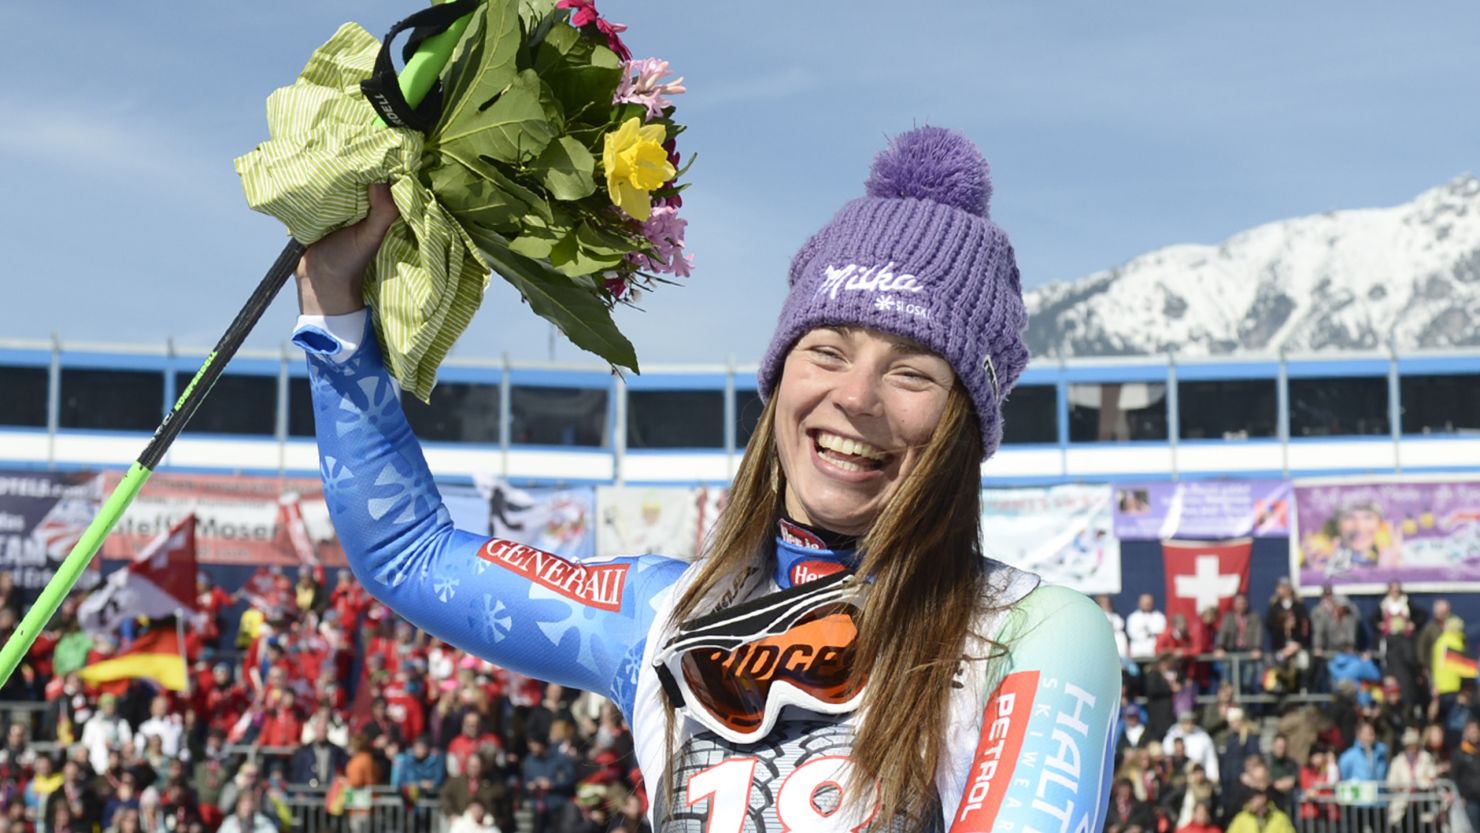 Tina Maze celebrates yet another World Cup win at the women's downhill in Garmisch, Germany.